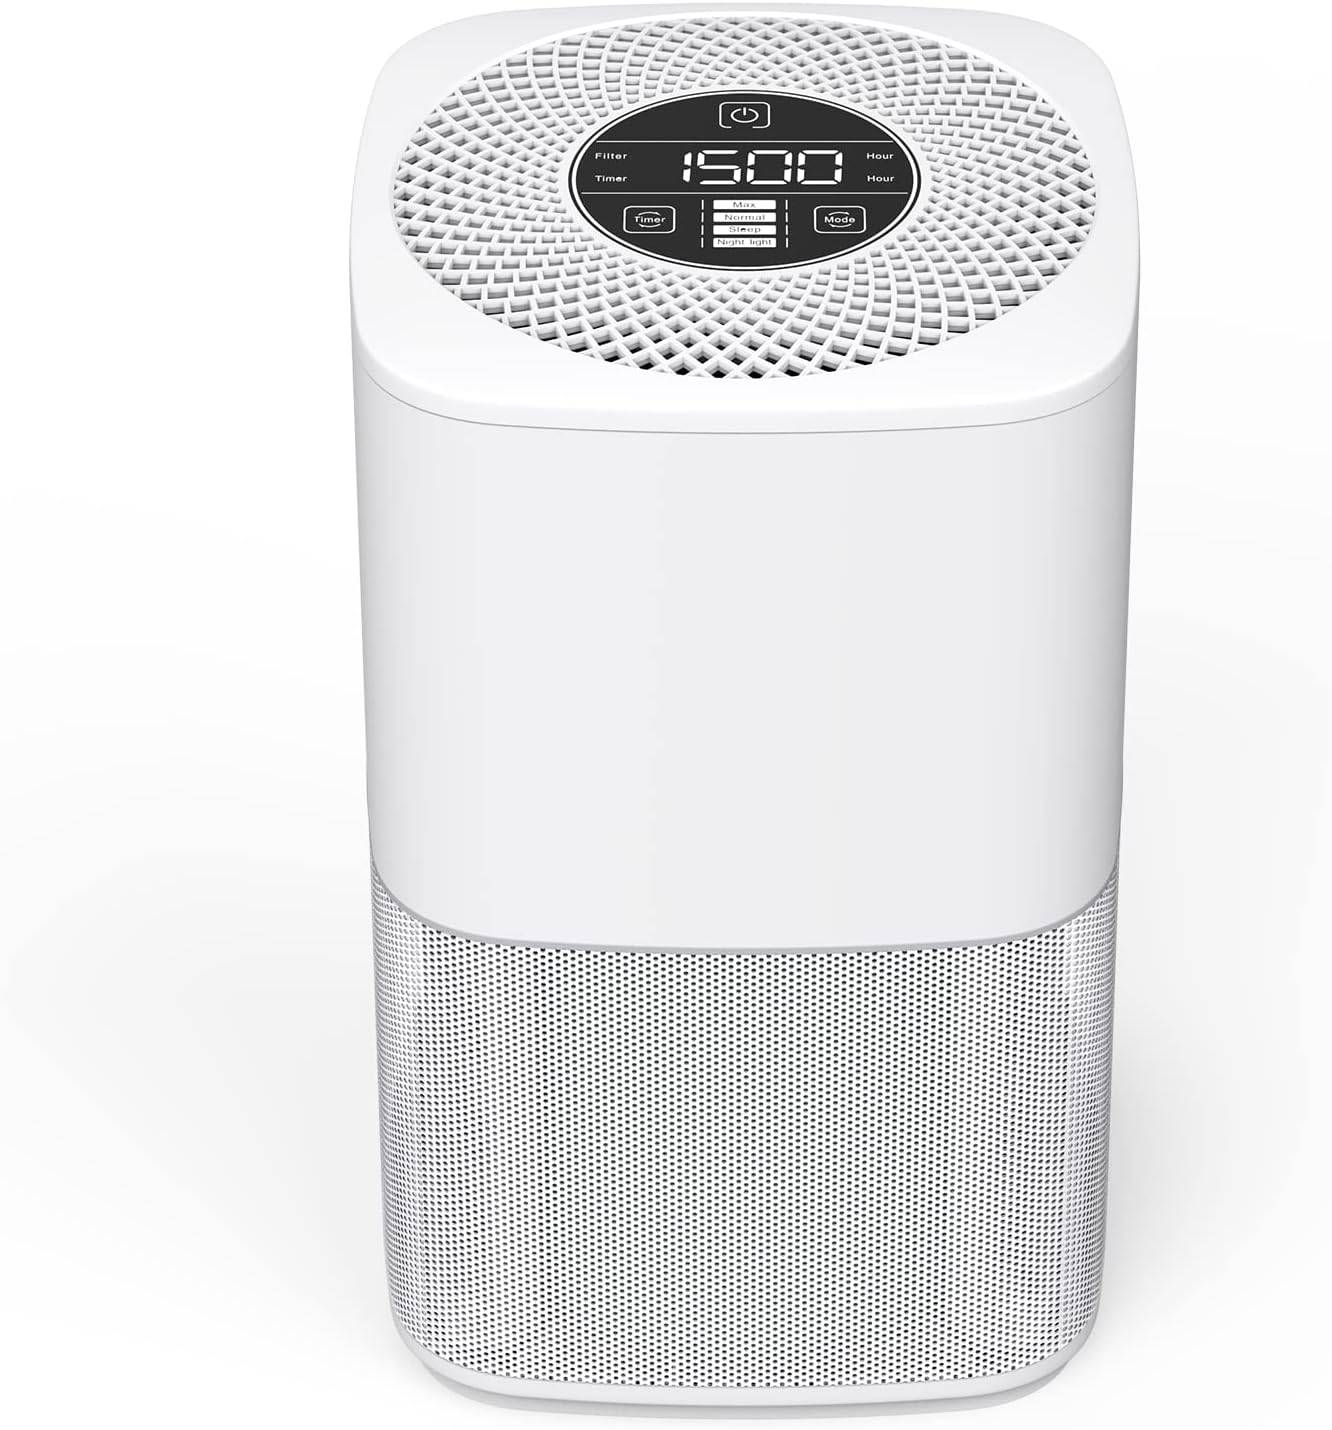 MORENTO Air Purifiers for Bedroom, Room Air Purifier HEPA Filter for Smoke,  Allergies, Pet Dander Odor with Fragrance Sponge, Small Air Purifier with